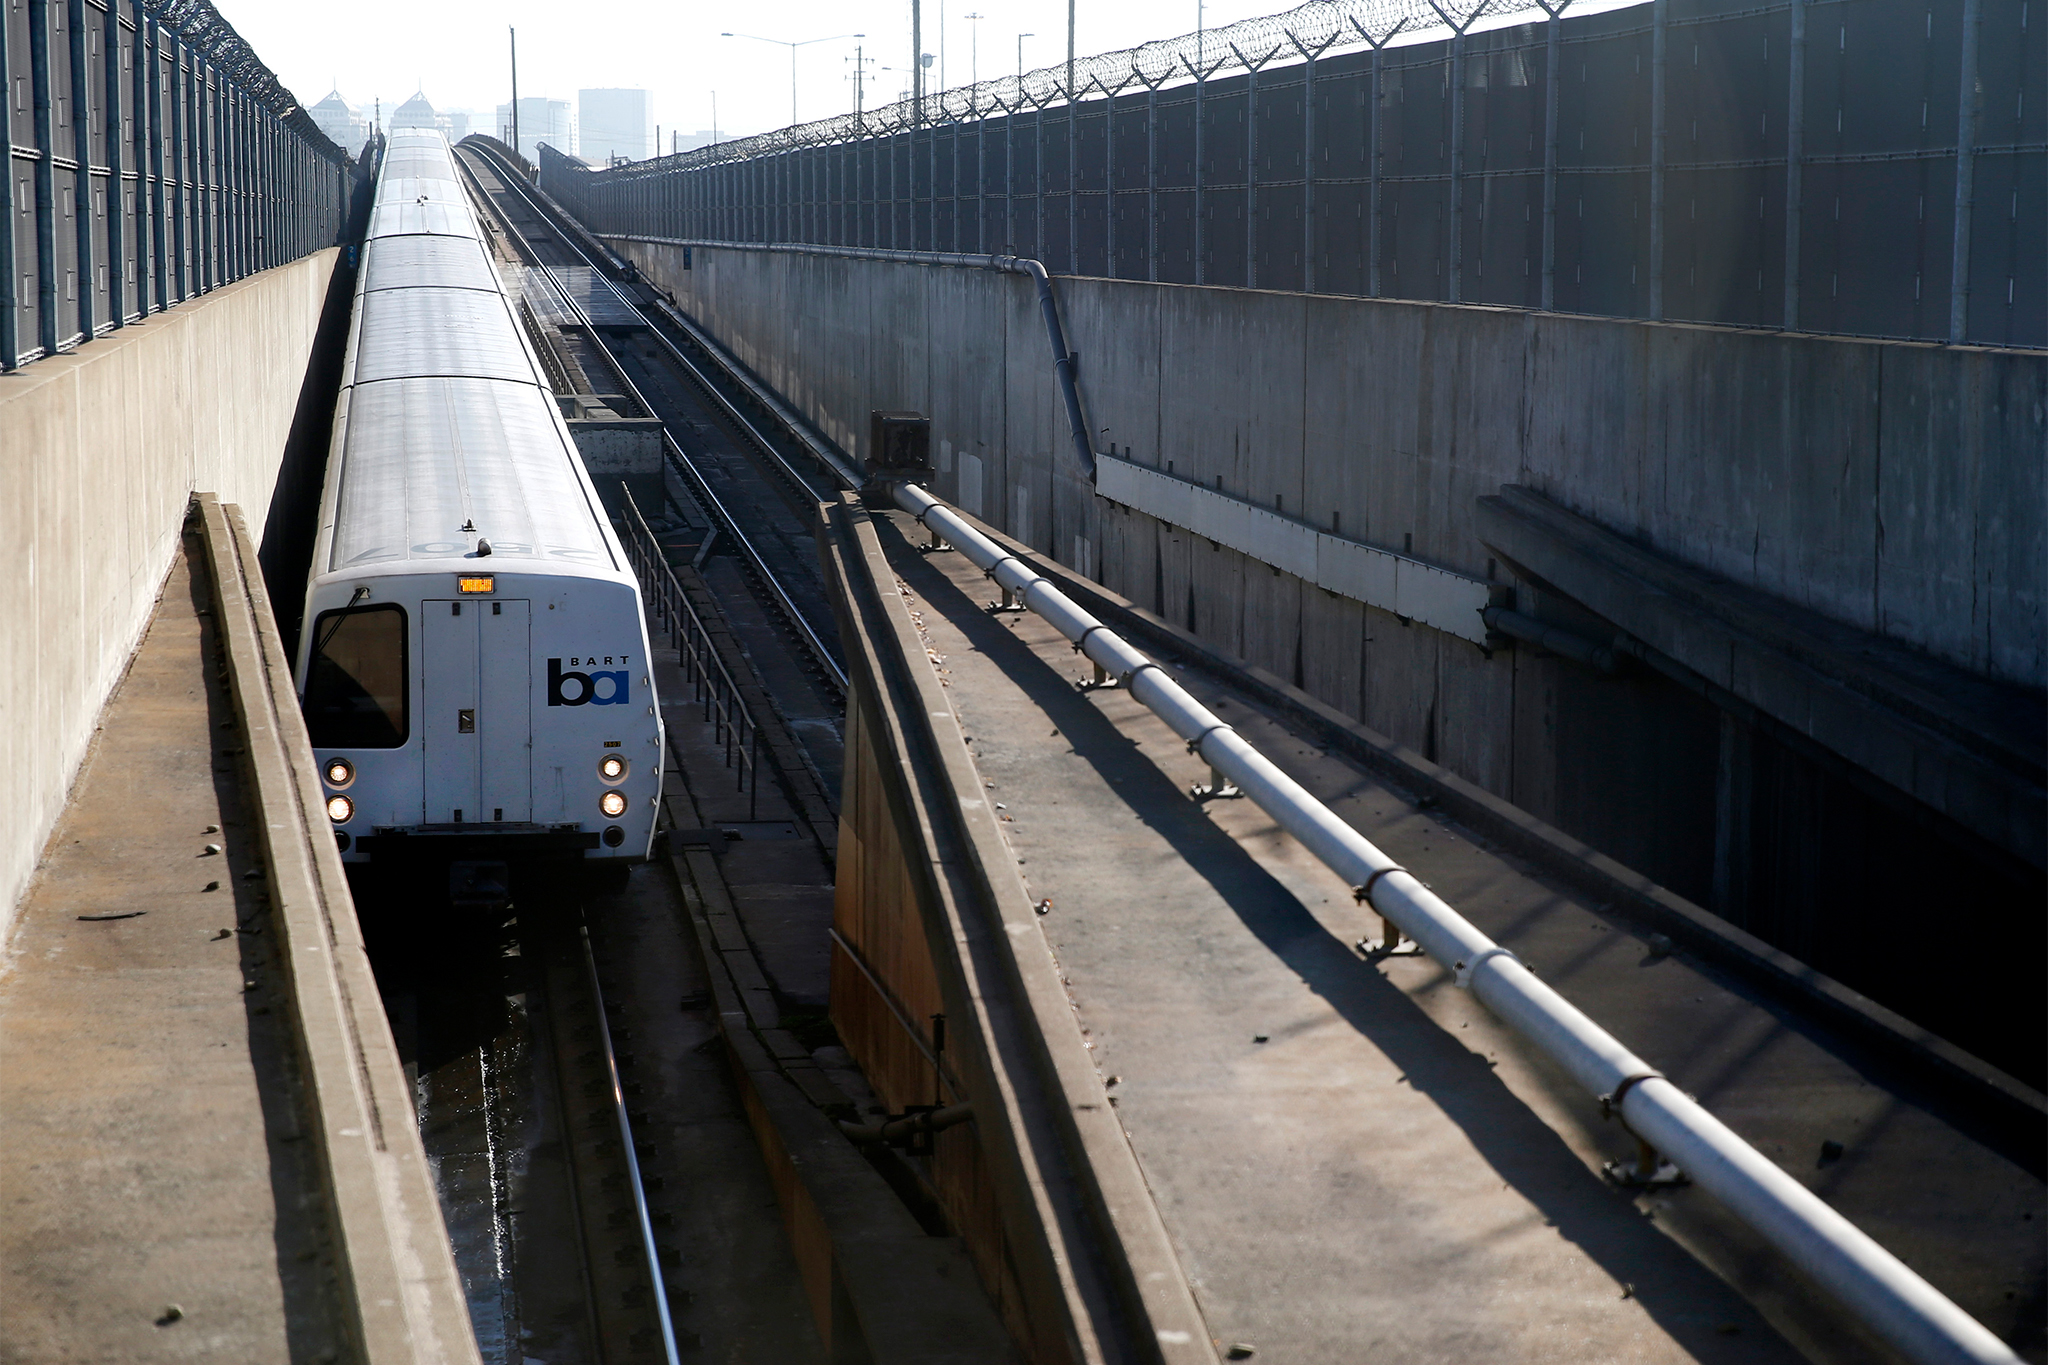 BART passenger attacked by man with cleaver-style knife, police say